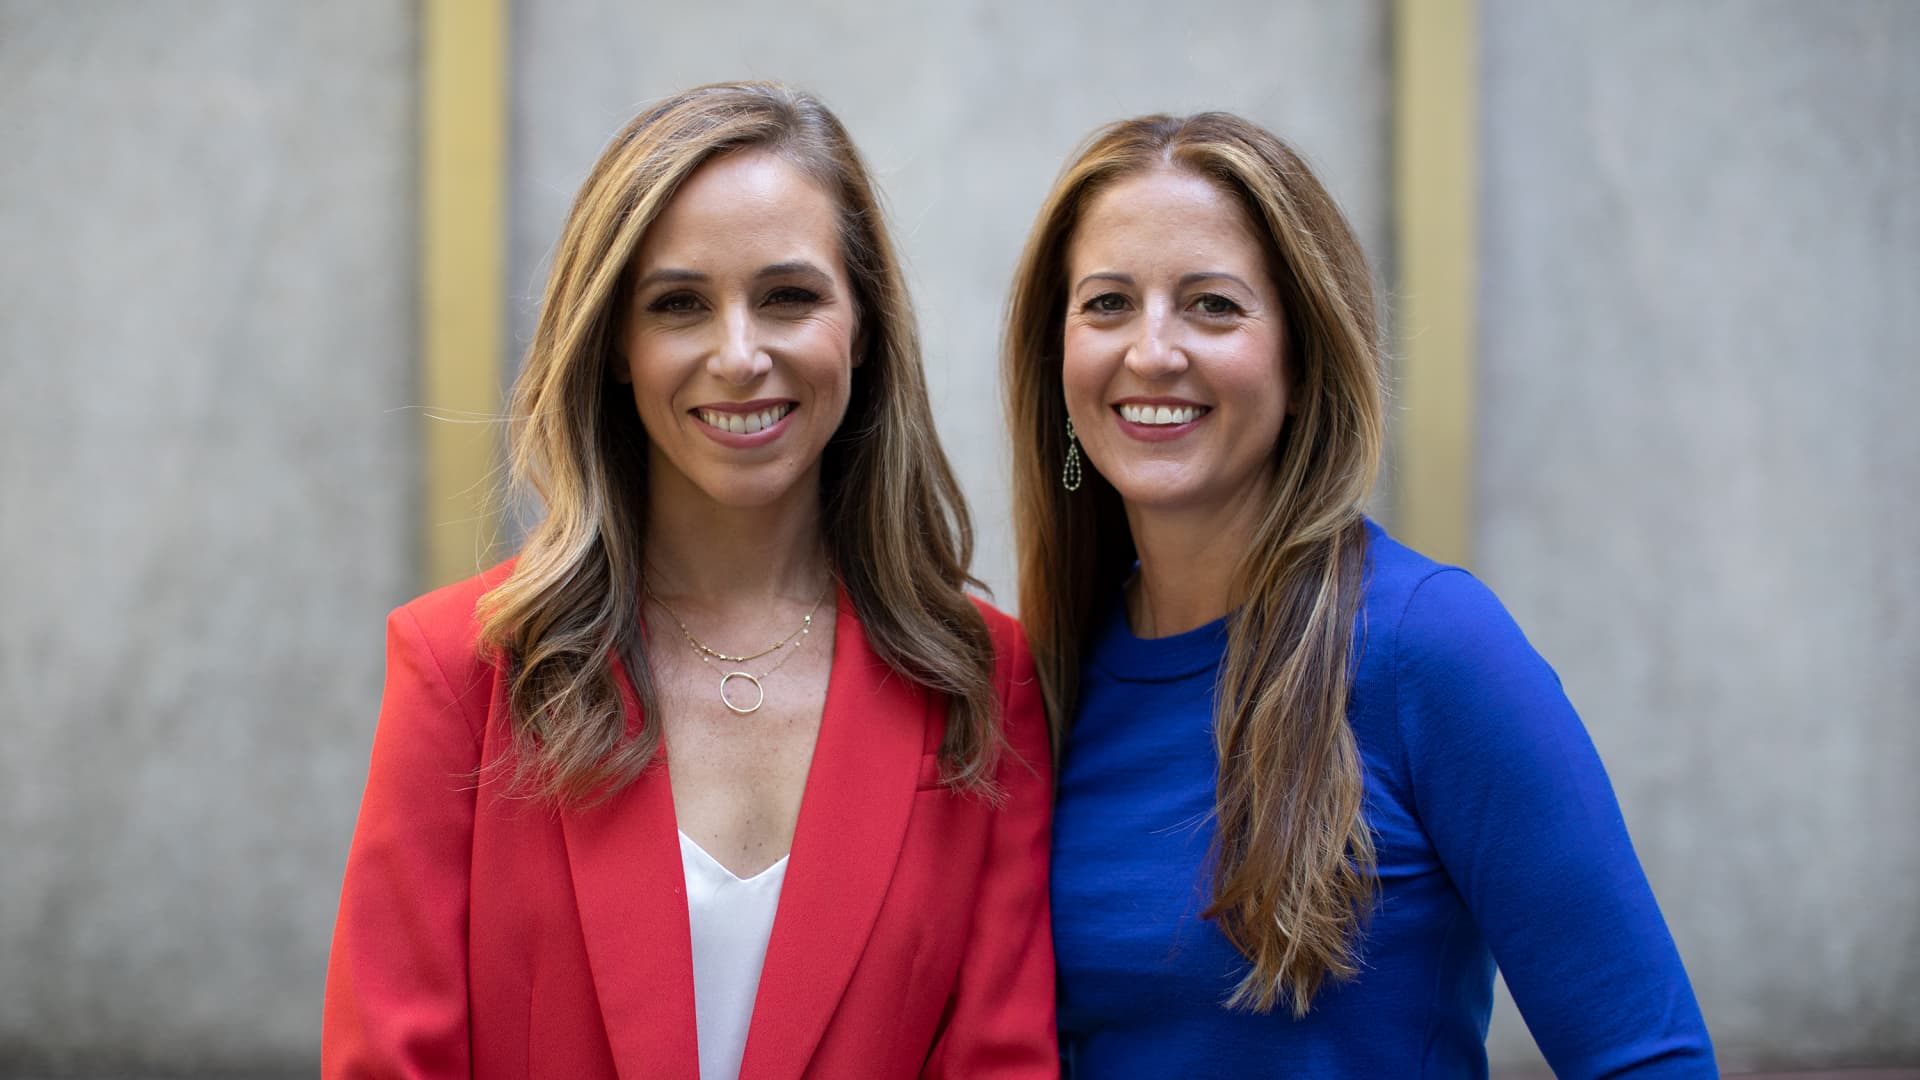 Primary co-founders and co-CEOs Cristina Carbonell and Galyn Bernard shifted the online children's clothing retailer to a four-day workweek during the pandemic and have no plans to go back to the longer week.